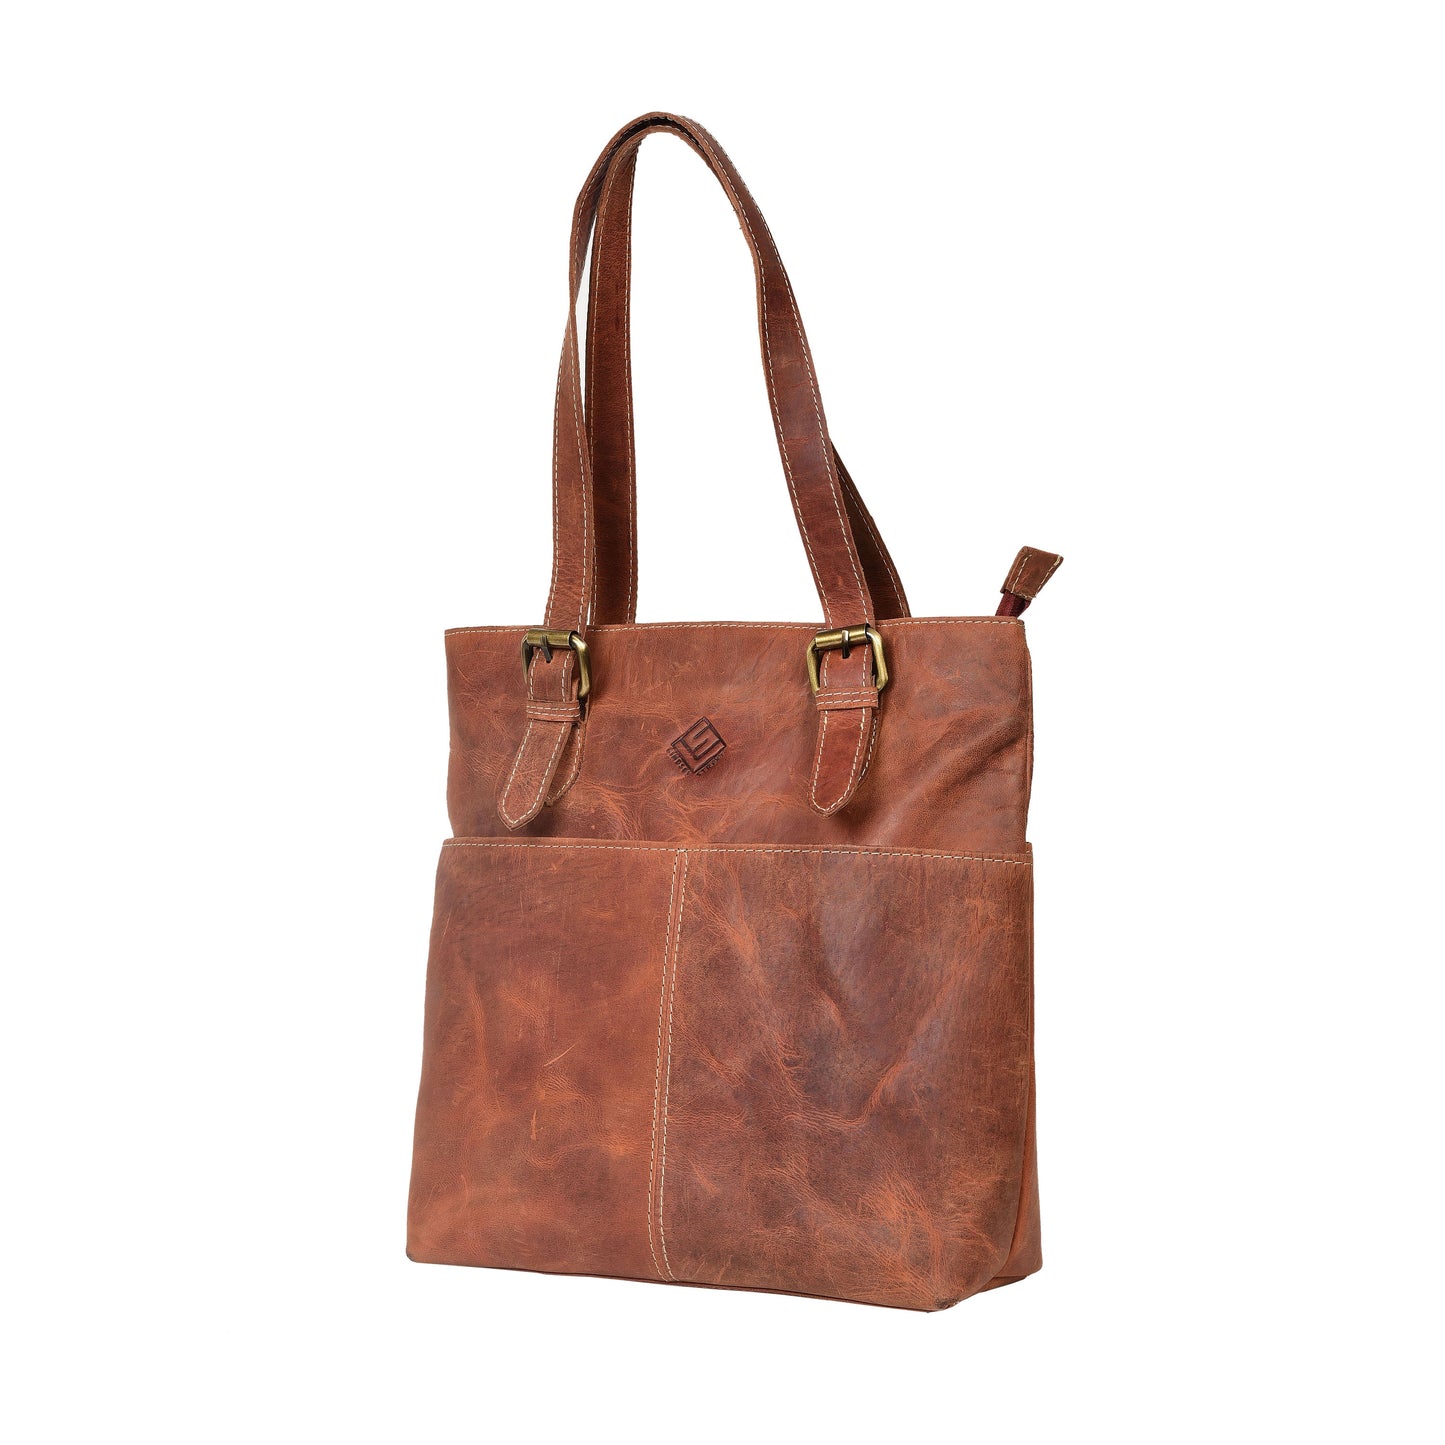 Vintage Brown Leather Tote Bag for Women , Office Tote Bag Everyday Leather Tote, Shoulder Bag with Pockets Daily Use Tote Purse